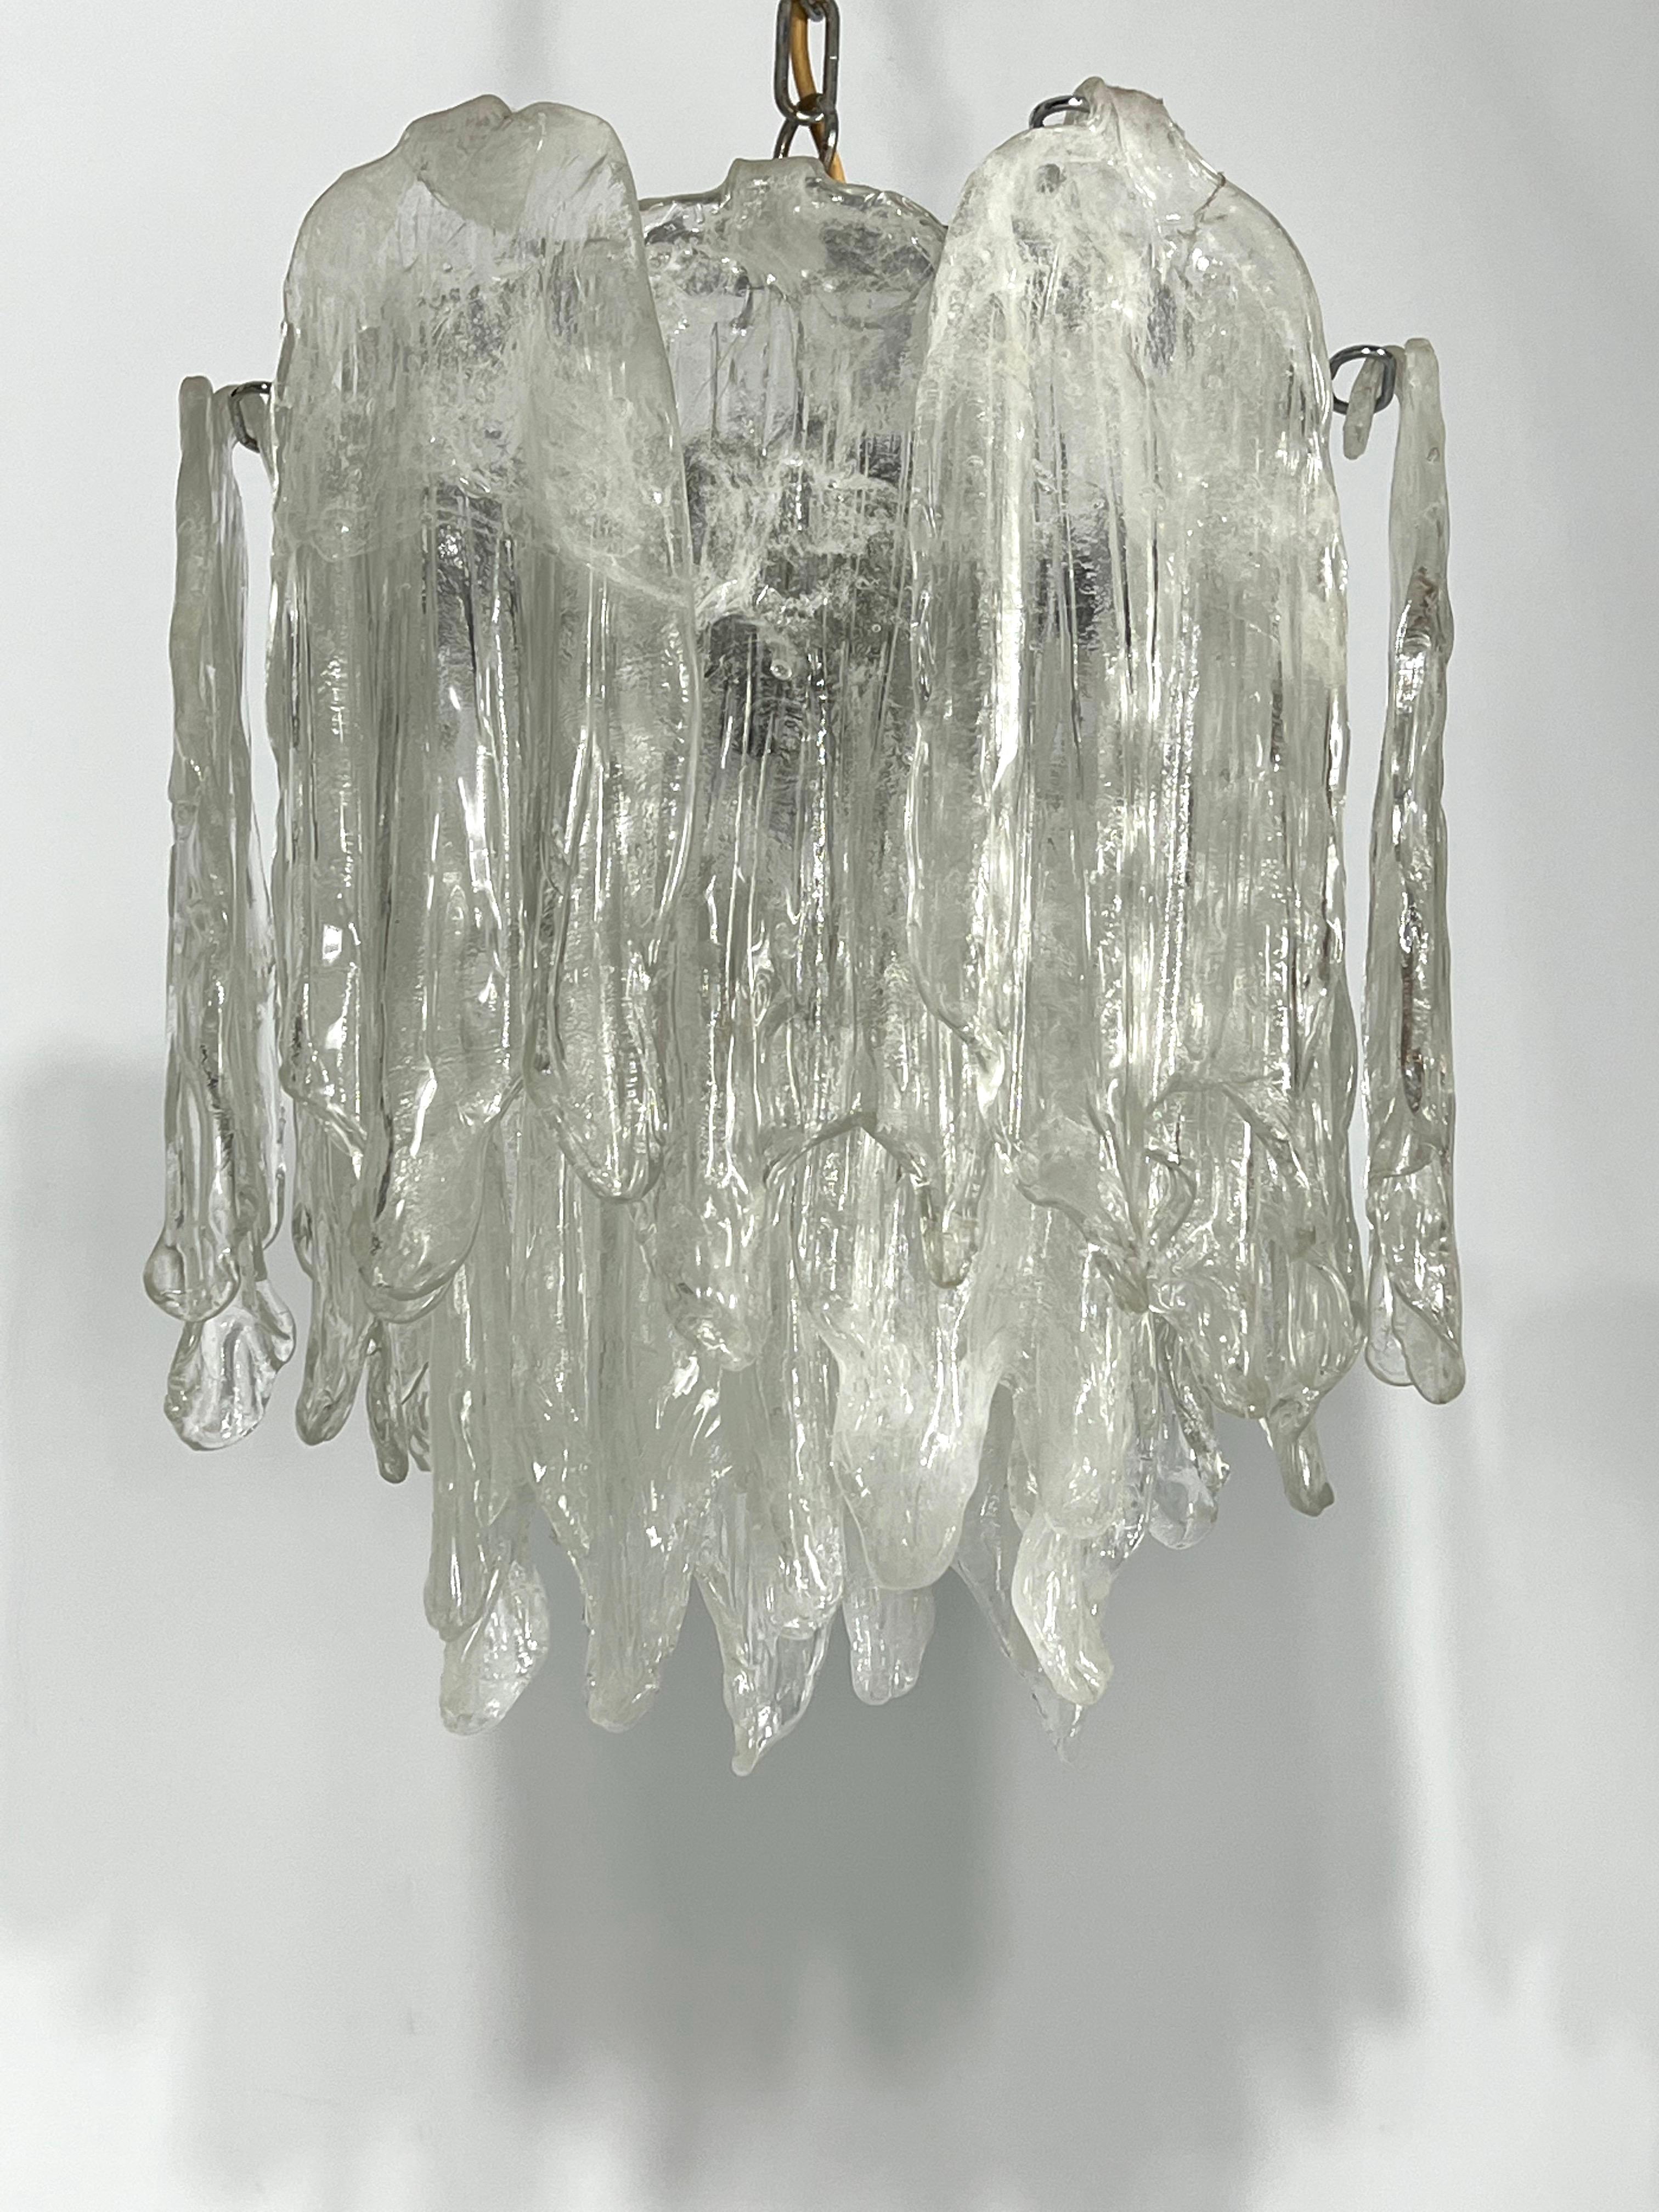 Mazzega Ice glass, pair of vintage murano chandeliers from 70s For Sale 9